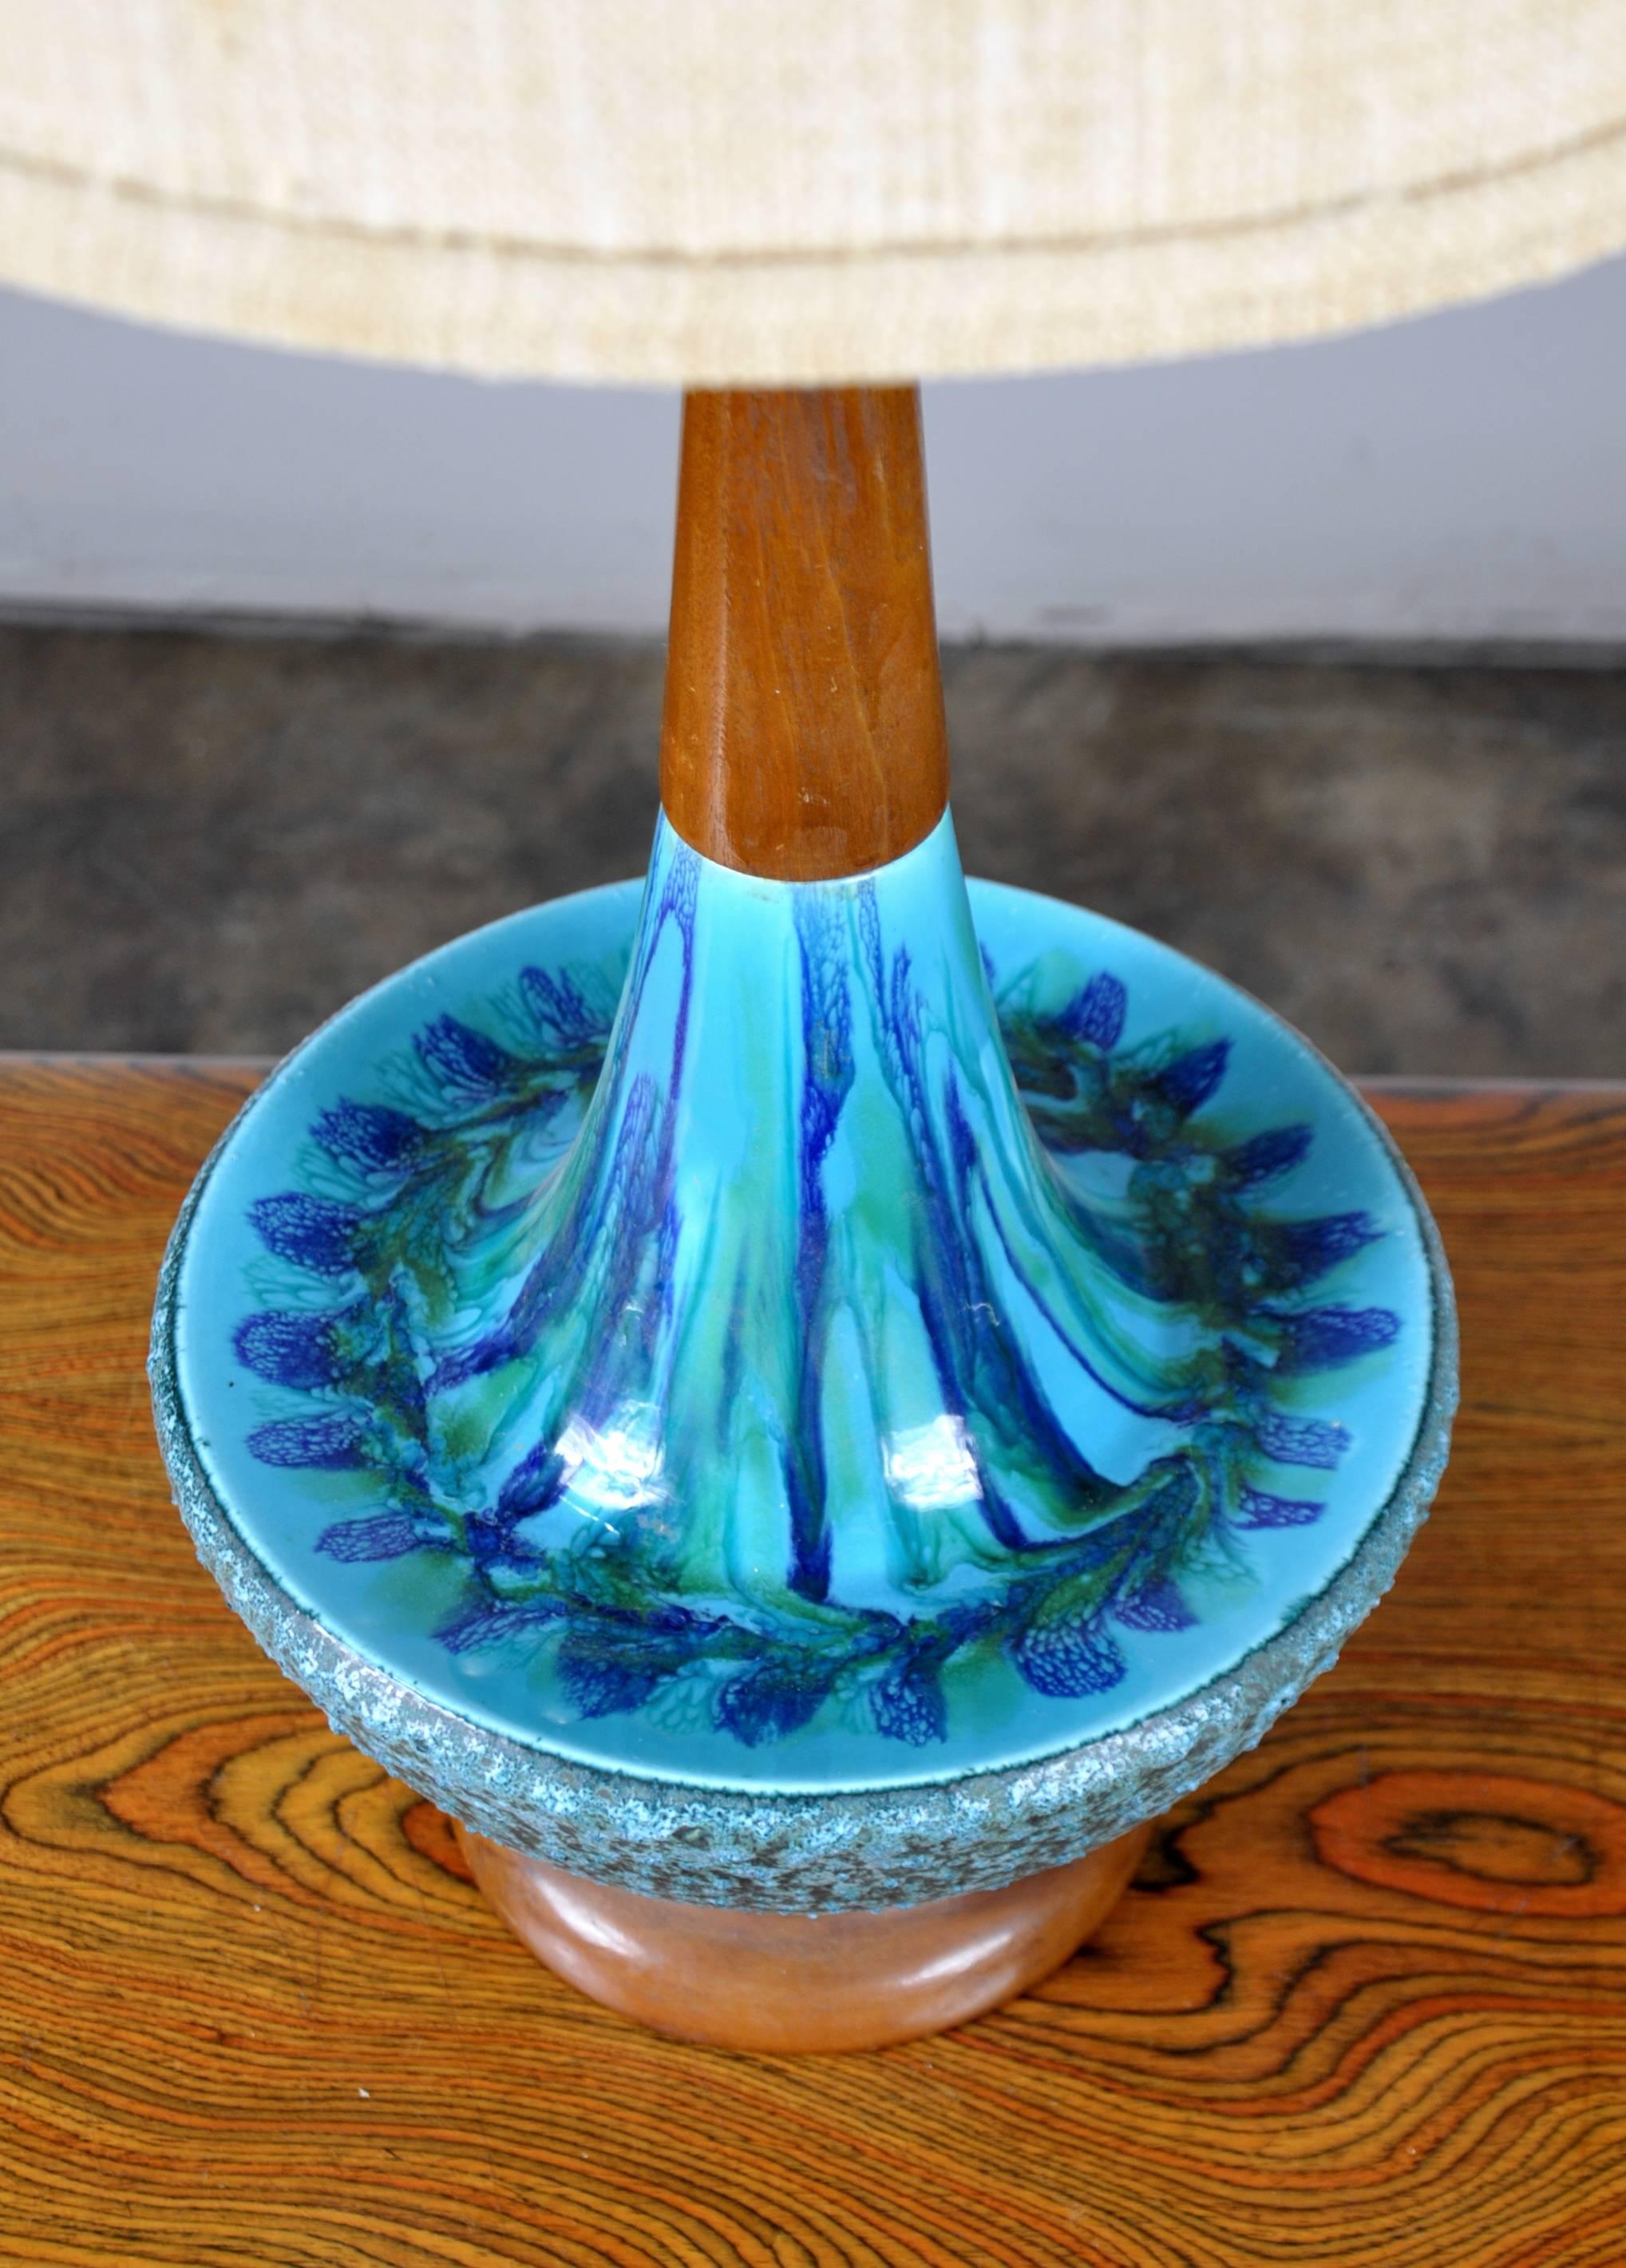 This tall Mid-Century vintage lamp dating from the 1960s features a smooth and textured ceramic body with drip glazed decoration in vivid turquoise and blue hues. The stem and base are wood. The tall original shade has an applied turquoise yarn